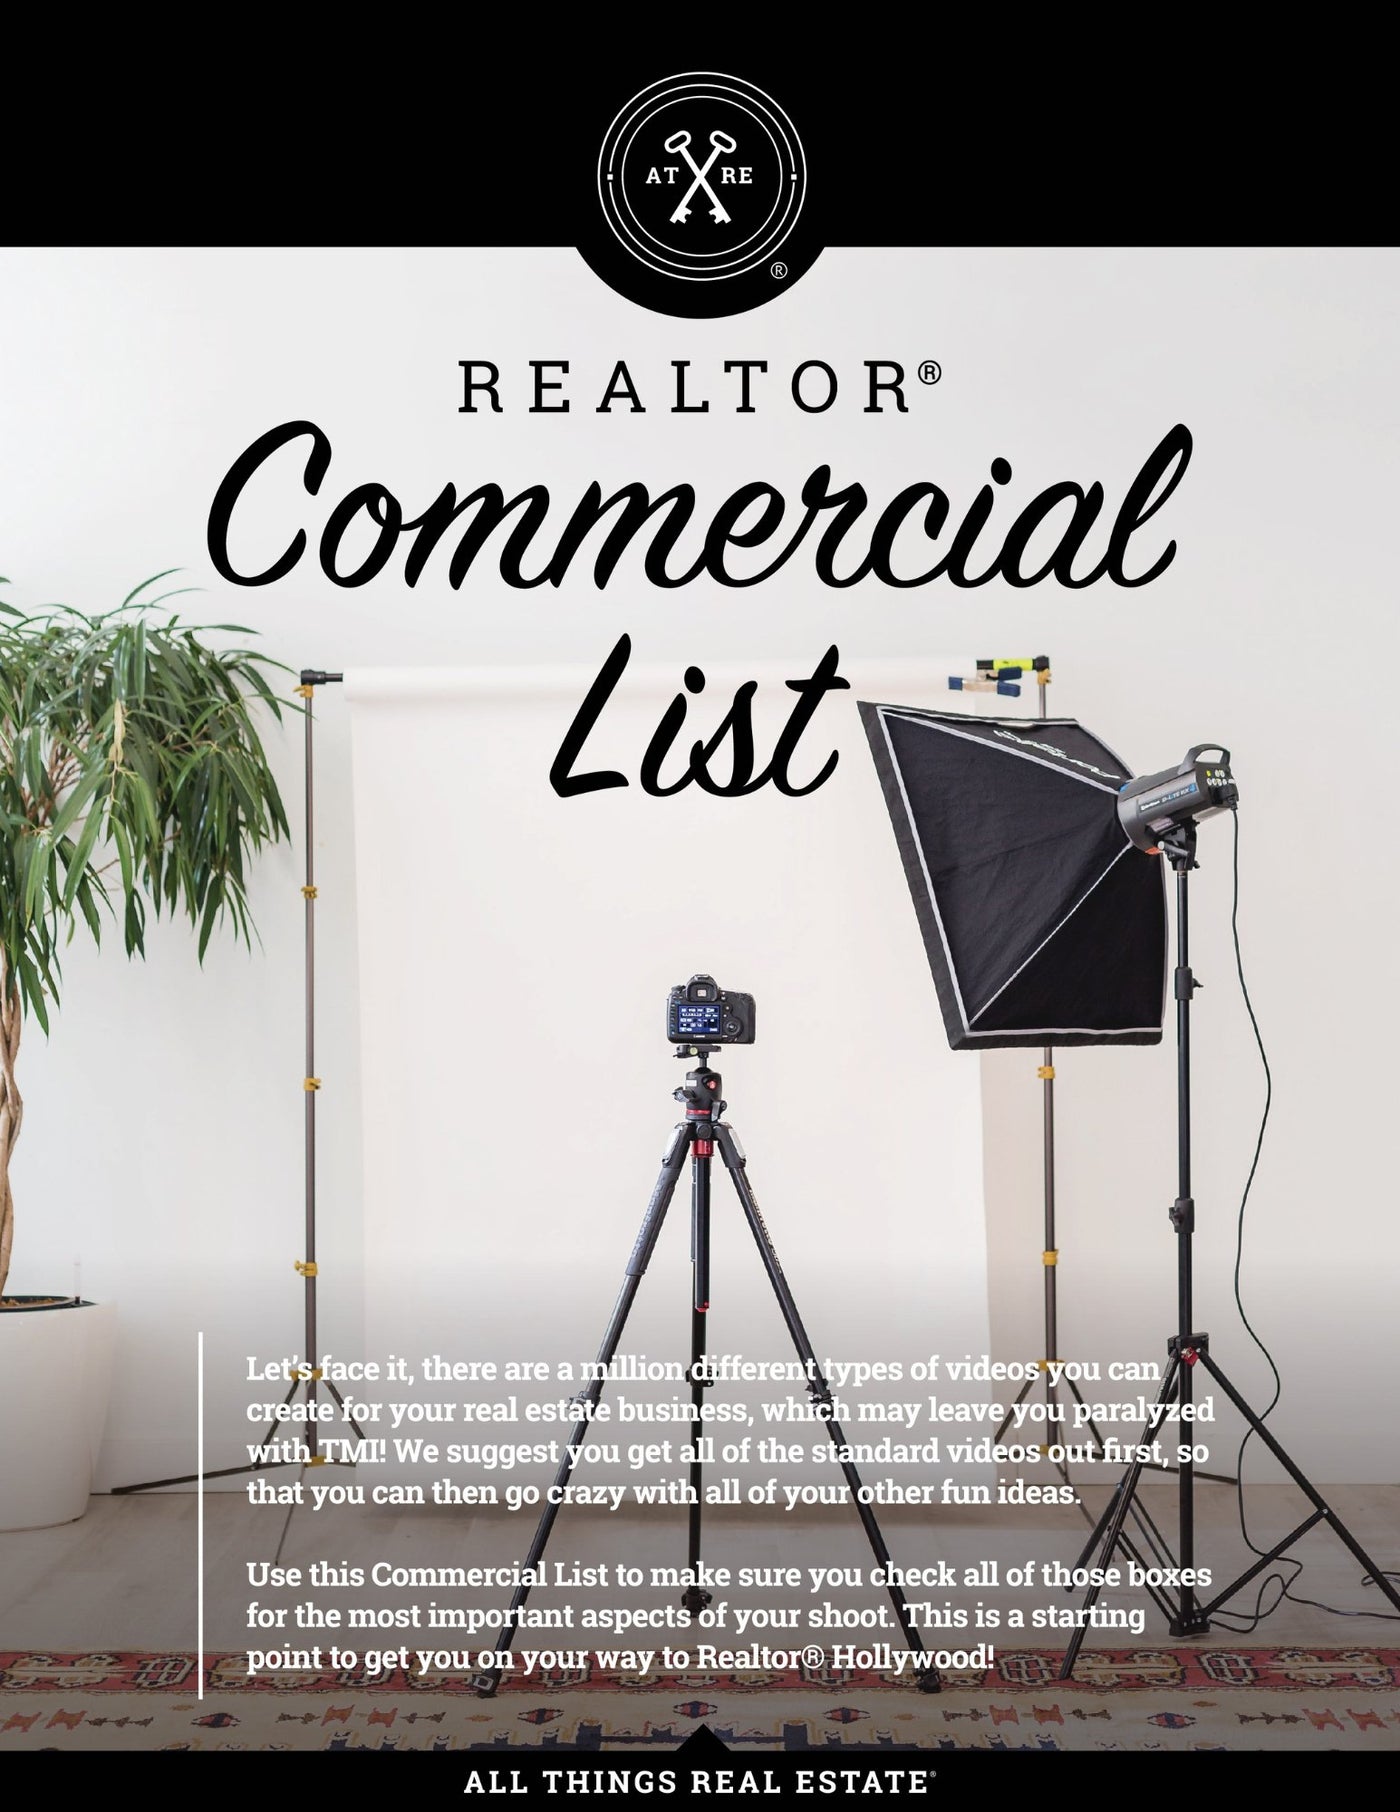 Creating Your Real Estate Agent Commercial Checklist - Instant Download - All Things Real Estate